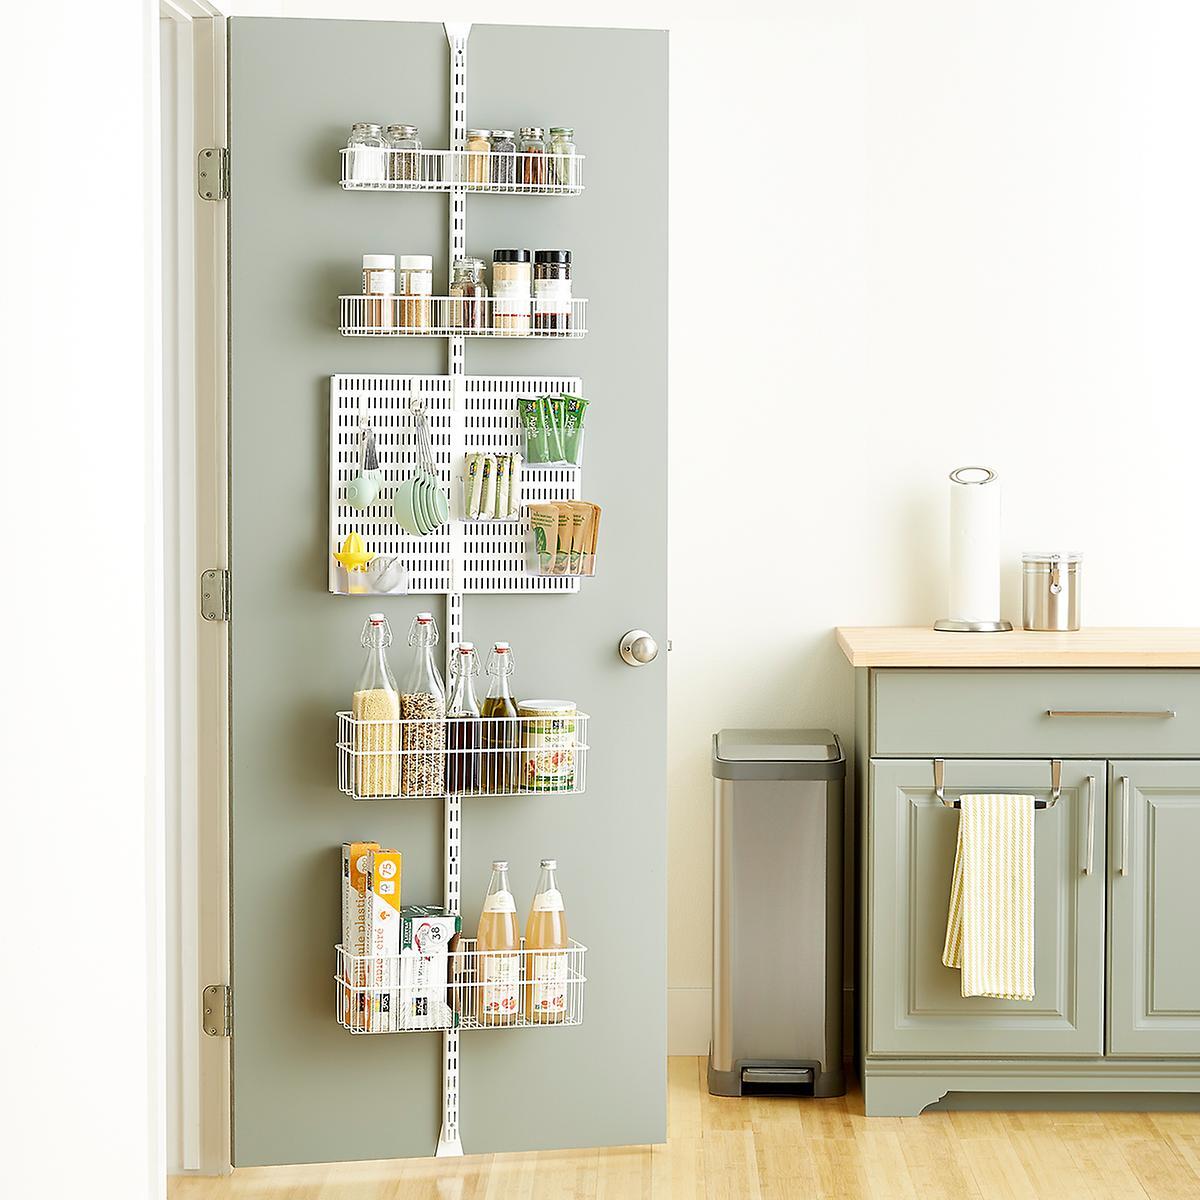 Pantry Storage: Emily Henderson Shares Her Top Tips for Keeping Your Pantry  Organized